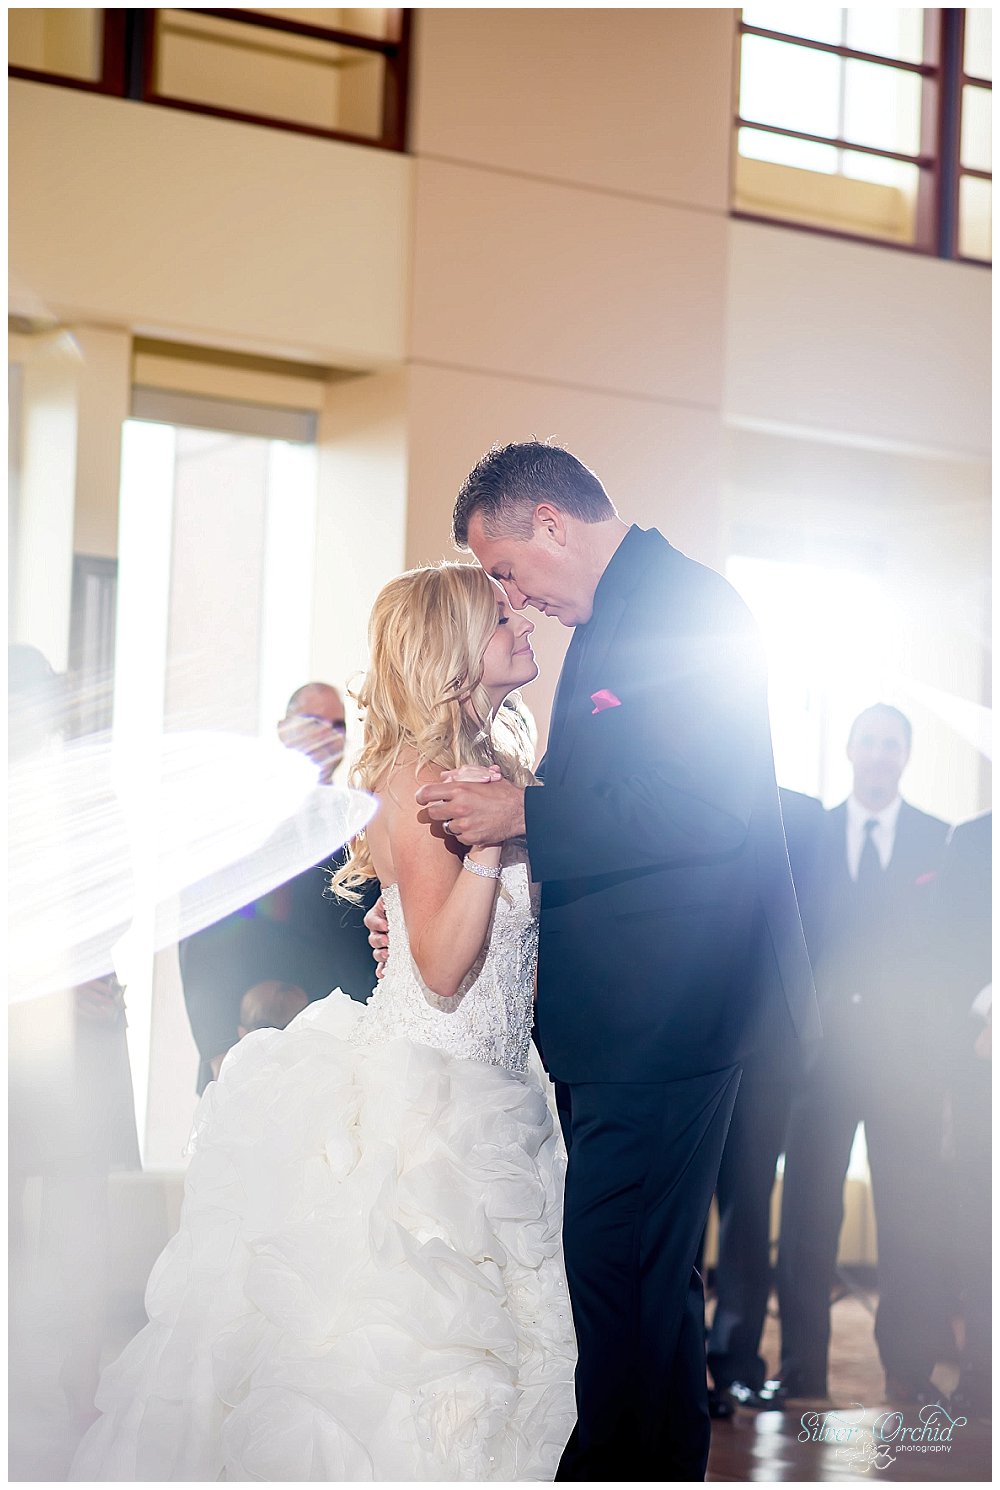 ©Silver Orchid Photography_wedding photography_FooteTopofTower_silverorchidphotography.com_0027.jpg